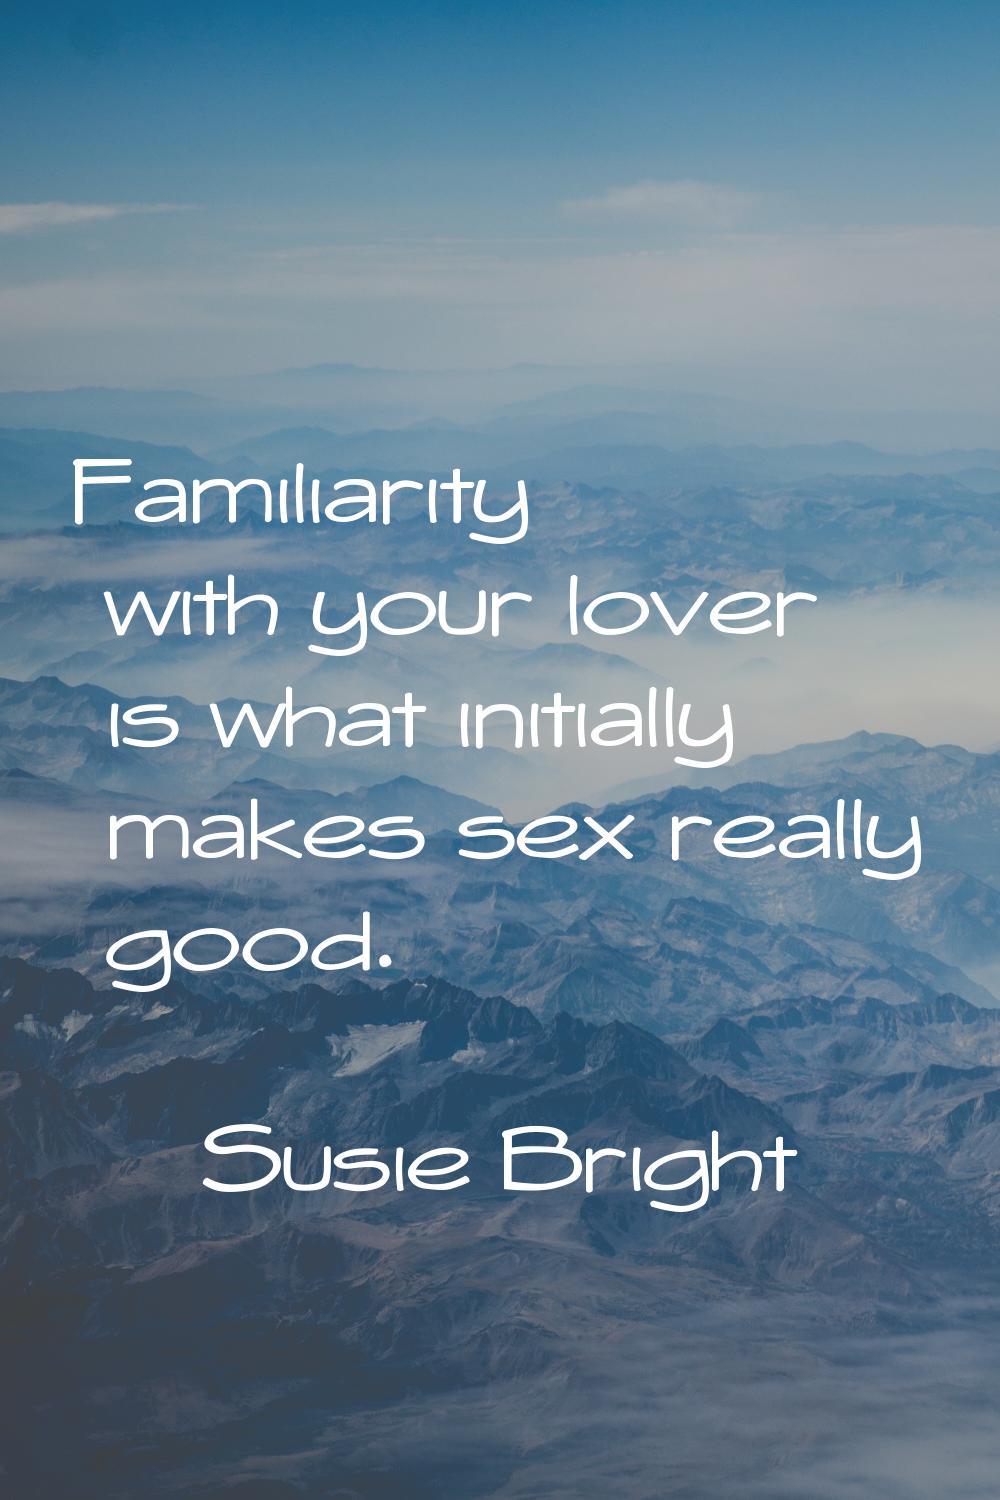 Familiarity with your lover is what initially makes sex really good.